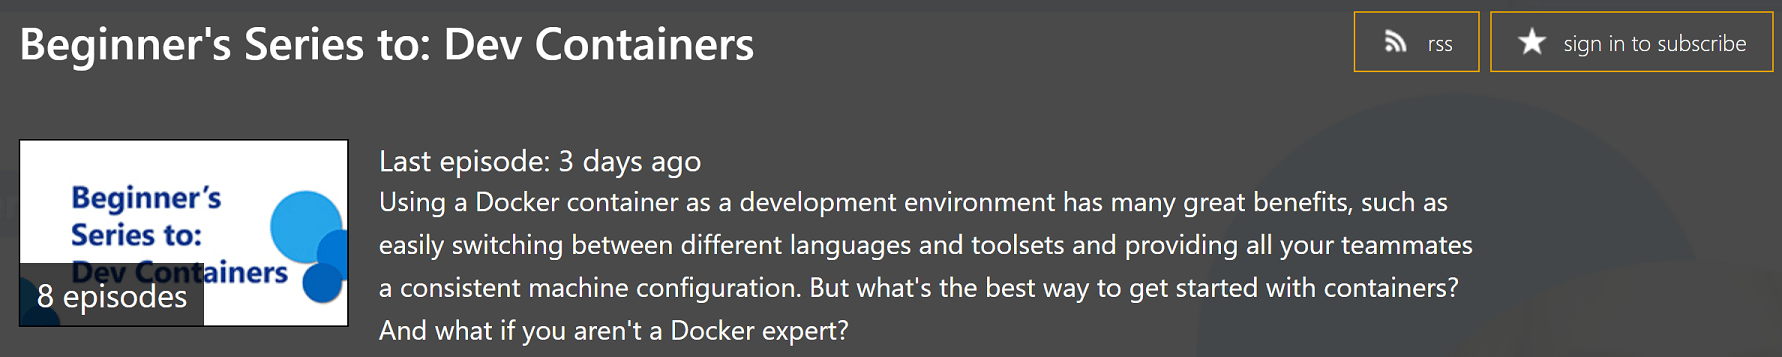 Beginner's dev containers videos series